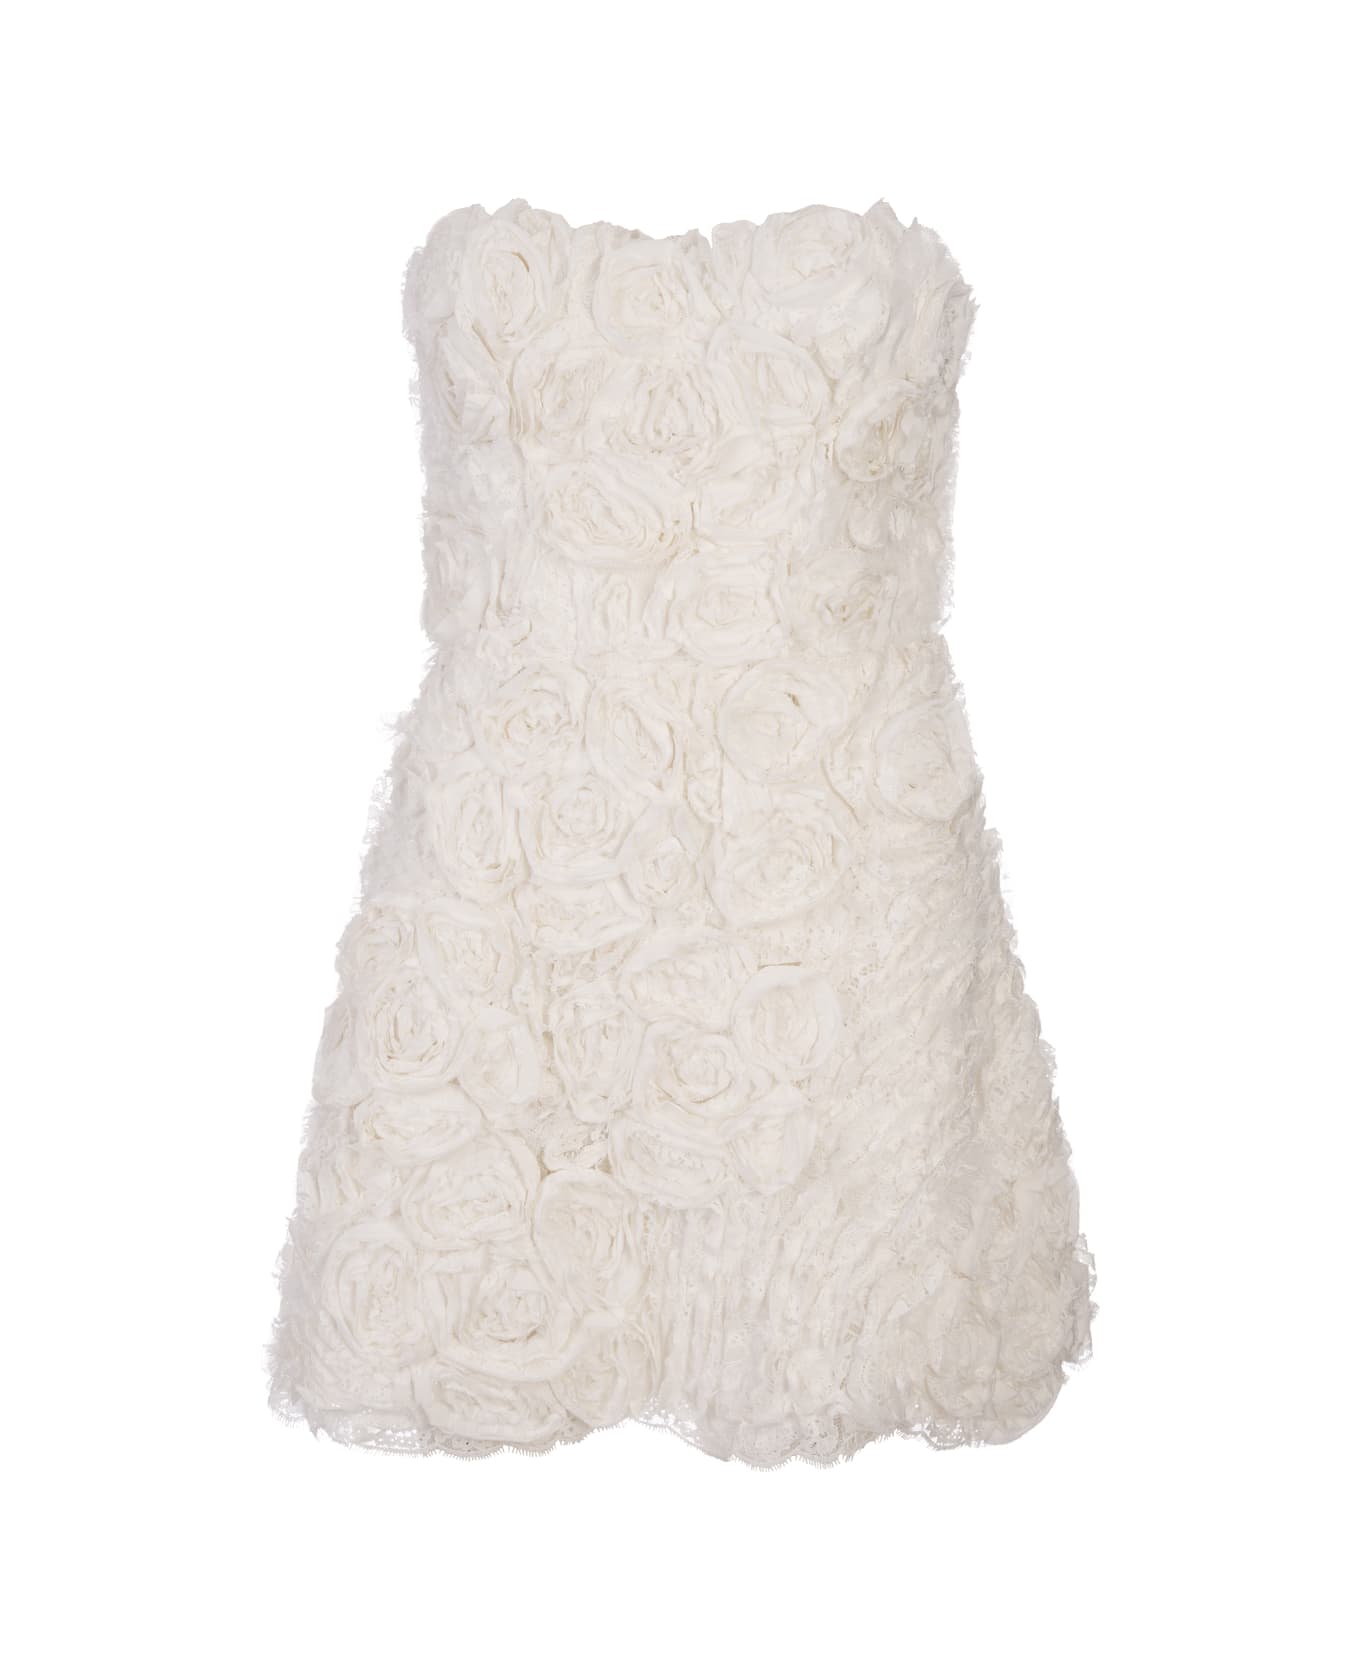 Ermanno Scervino Sculpture Dress In White Lace With Applied Roses - White